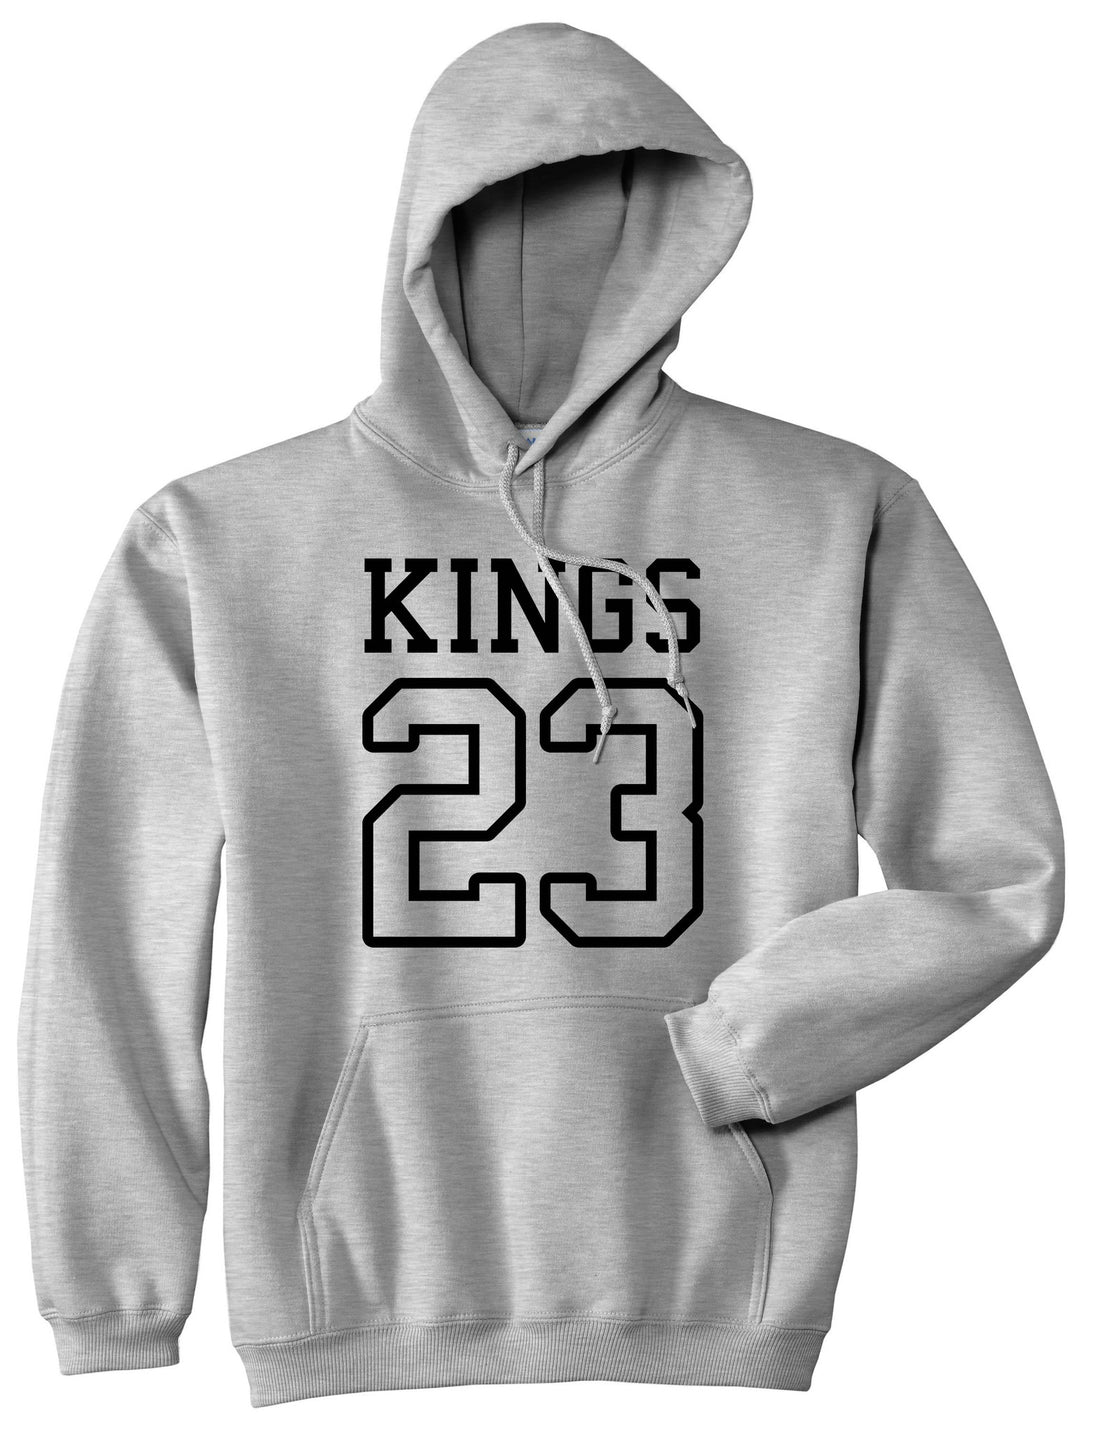 KINGS 23 Jersey Pullover Hoodie in Grey By Kings Of NY